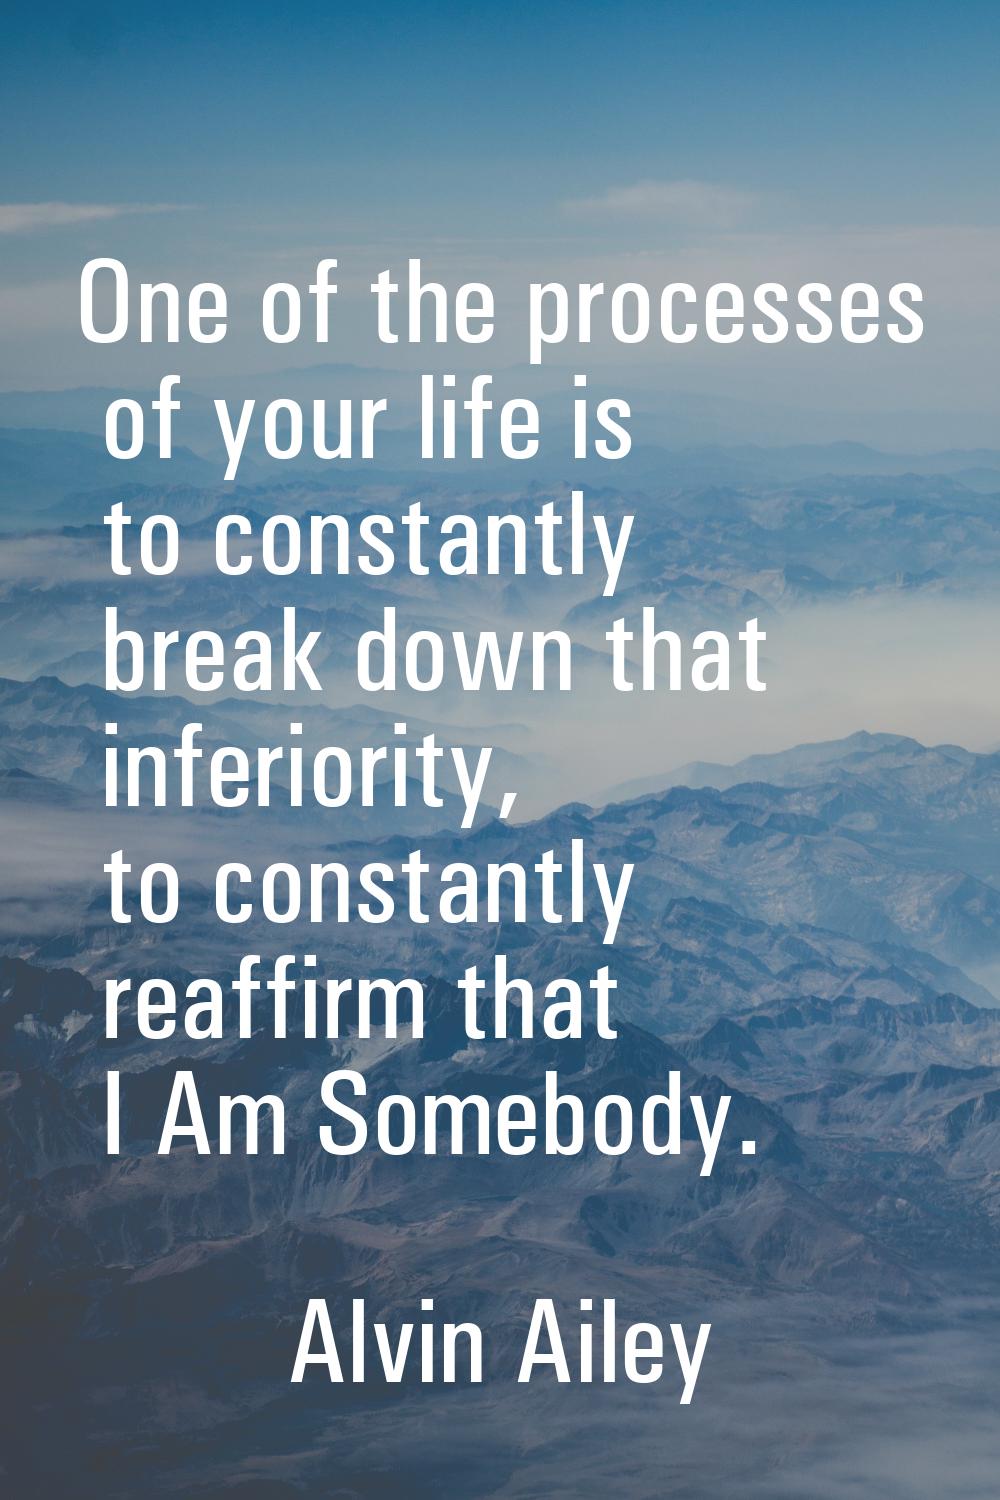 One of the processes of your life is to constantly break down that inferiority, to constantly reaff